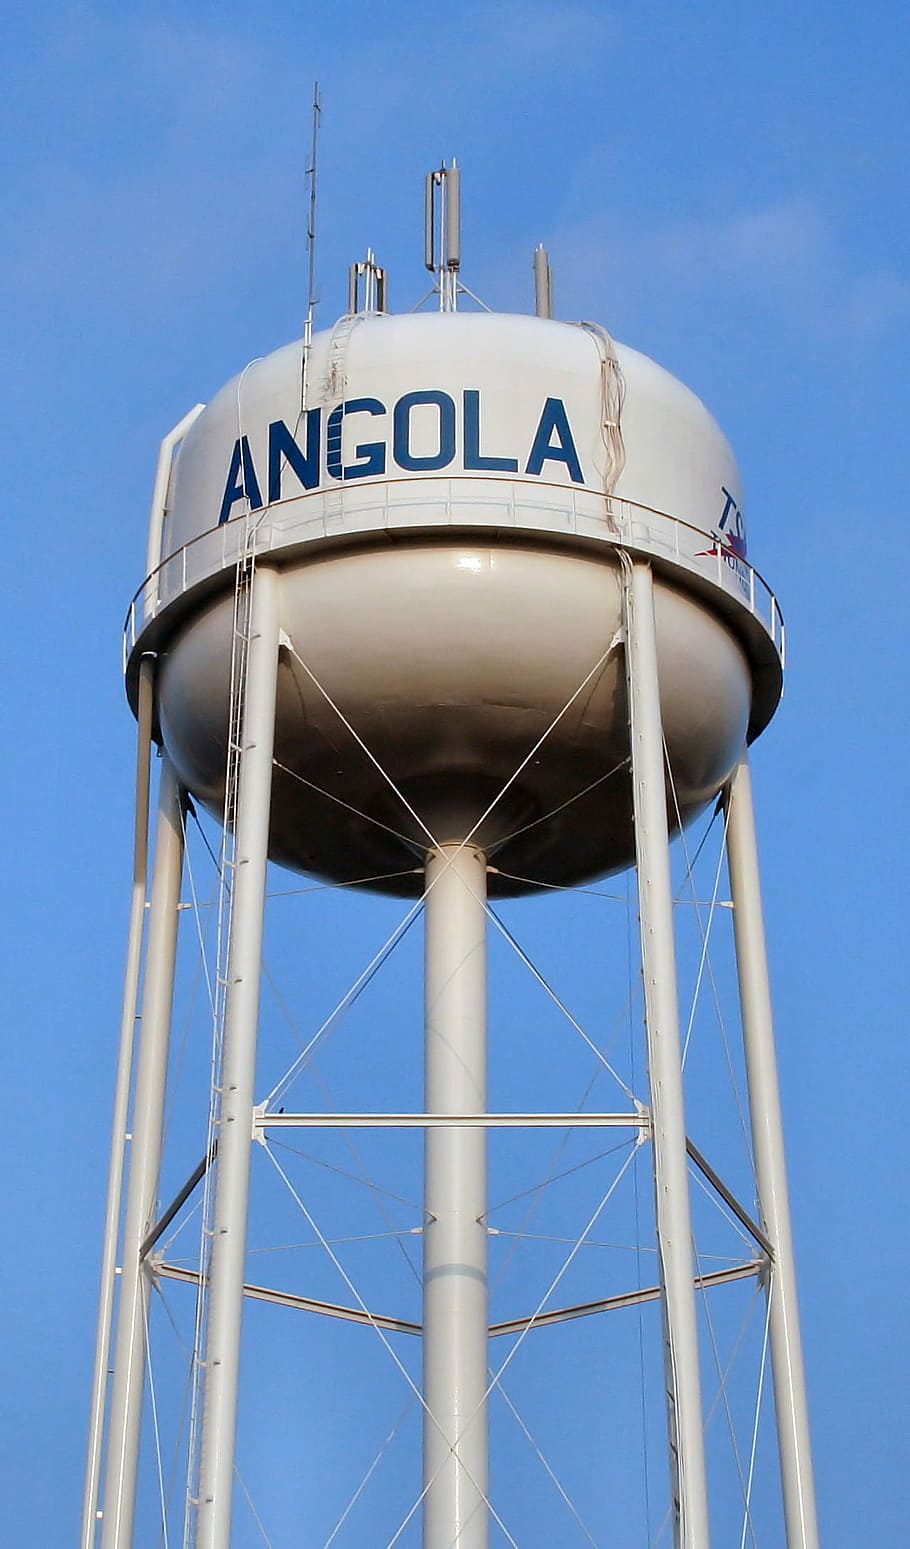 angola water tower, Angola, Water Tower, Indiana, public domain, structure, water Tower - Storage Tank, blue, tower, sky